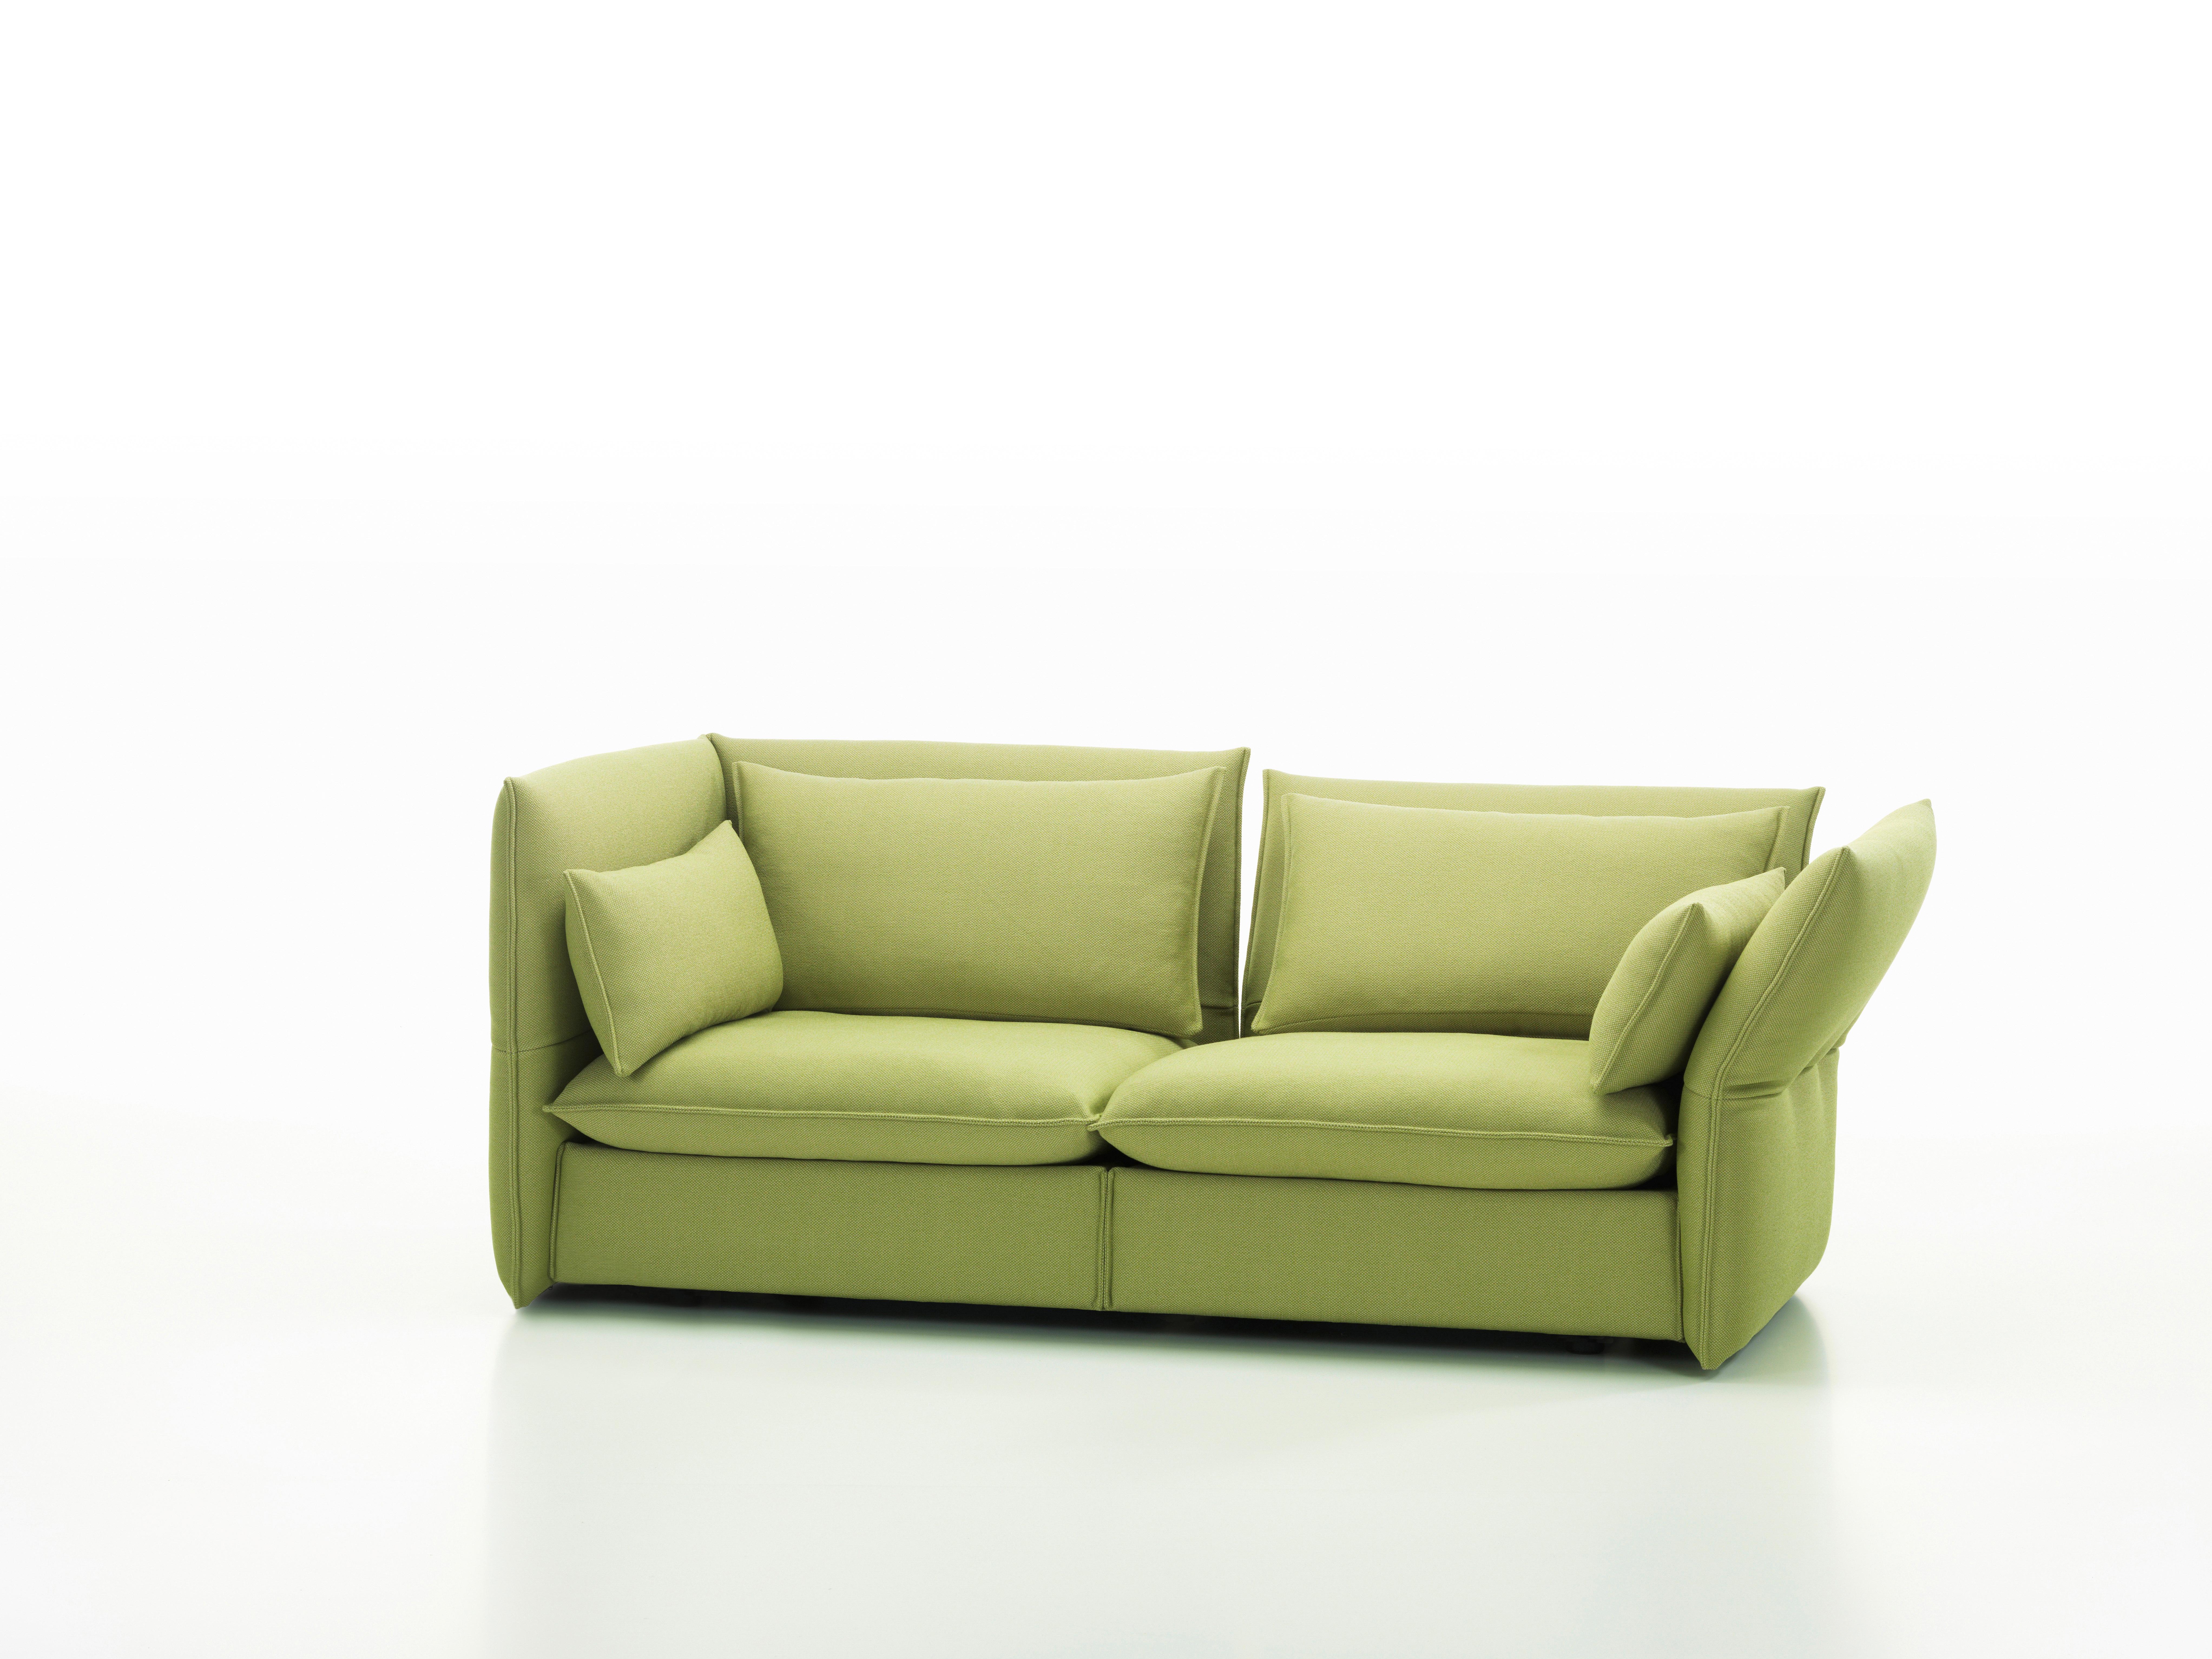 Vitra Mariposa 2 1/2-Seat Sofa in Sand Avocado by Edward Barber & Jay Osgerby In New Condition For Sale In New York, NY